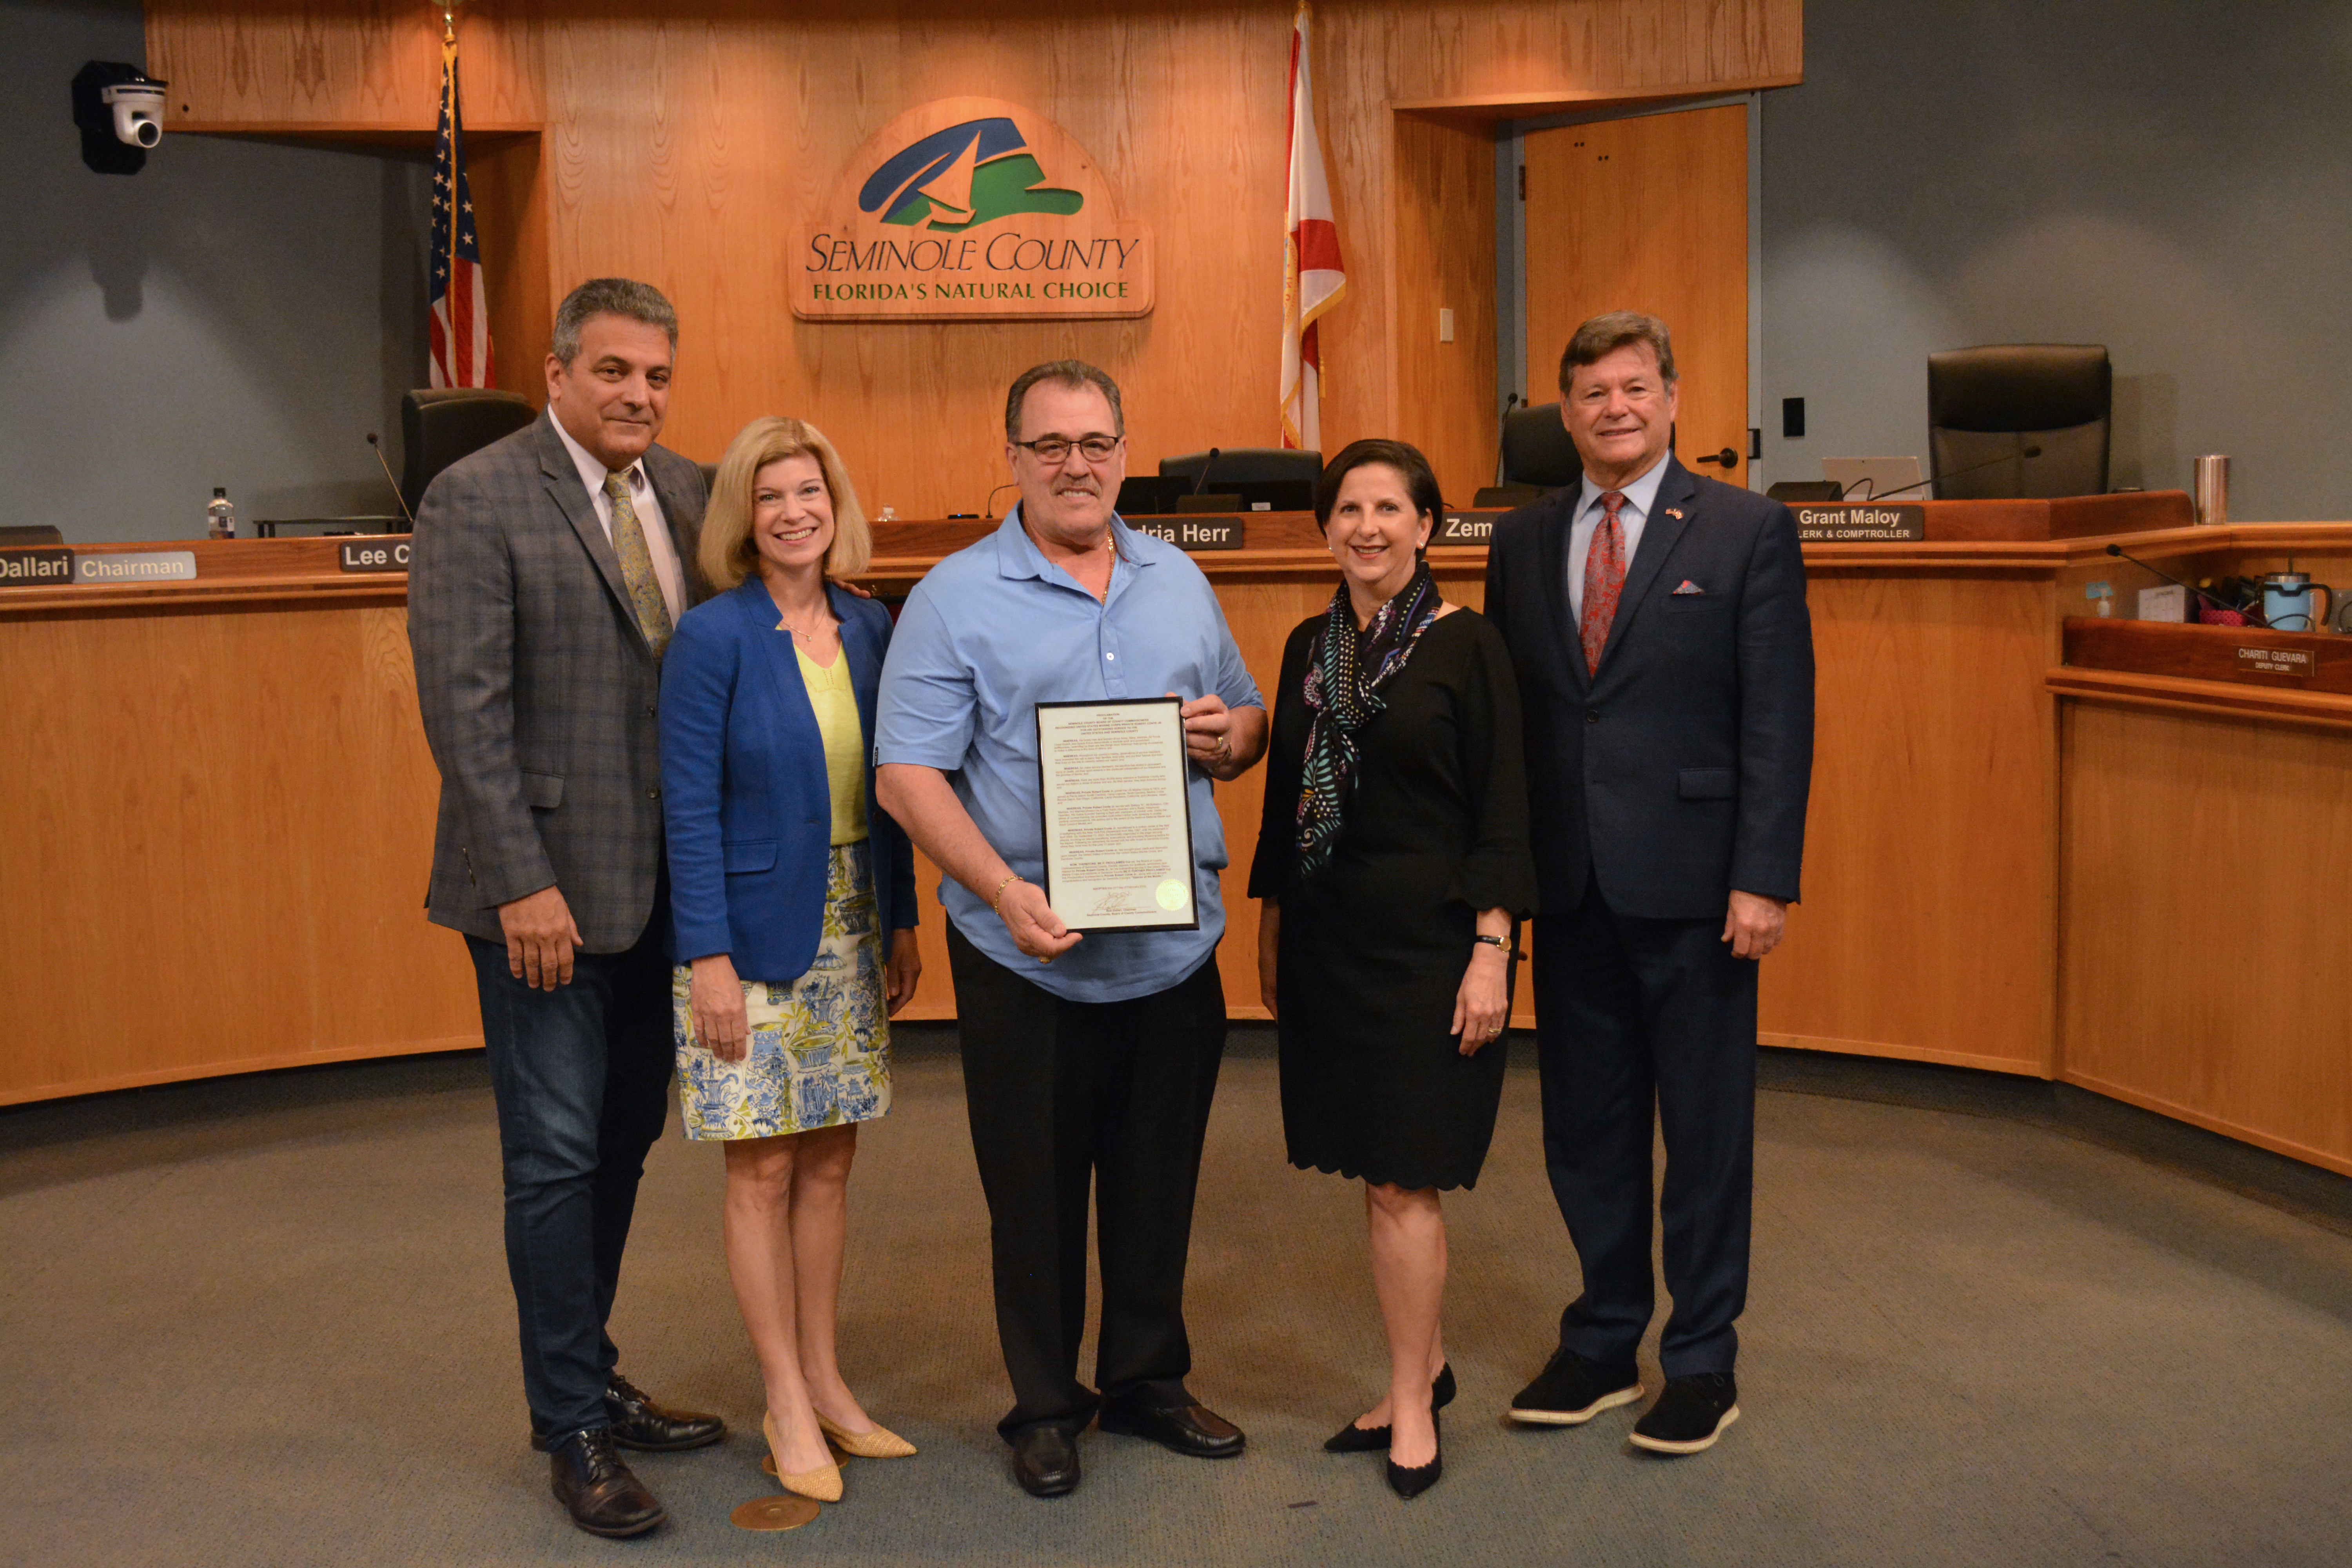 Proclamation - Proclaiming Private Robert Conte Jr. of the United States Marine Corps, as Seminole County's February Veteran of the Month